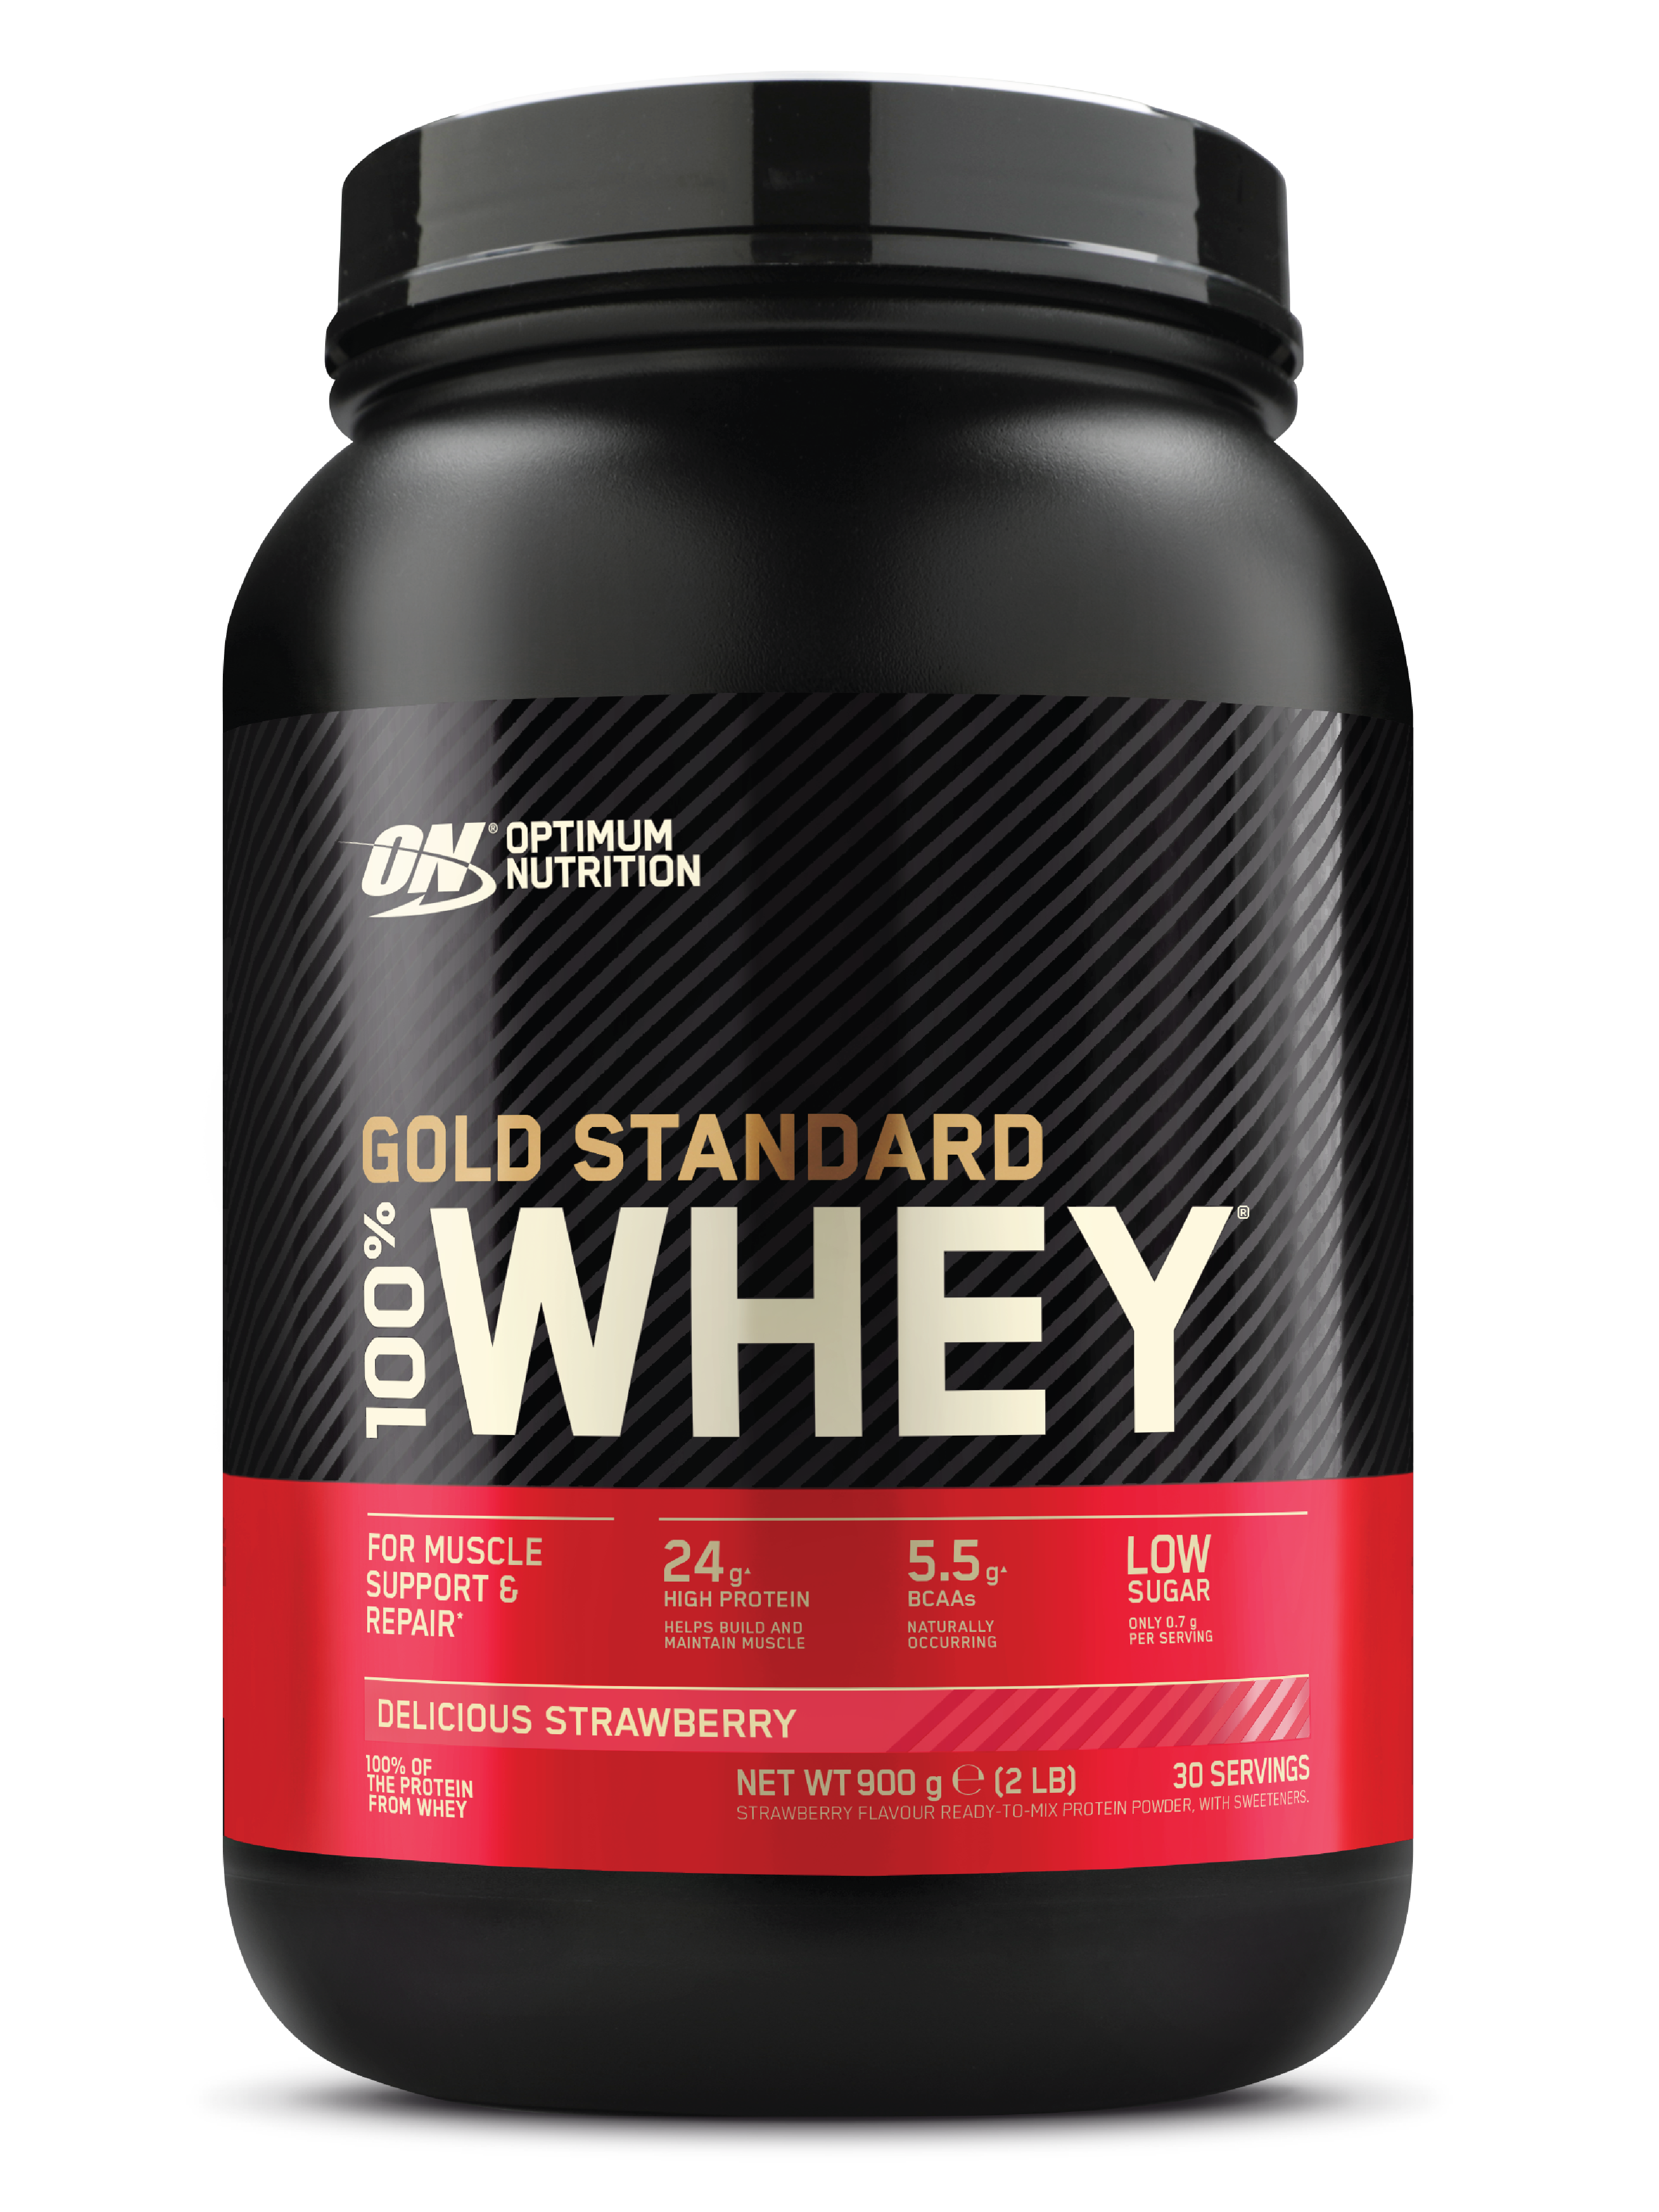 Optimum Nutrition 100% Whey GOLD Standard Whey, Delicious Strawberry, 900 g